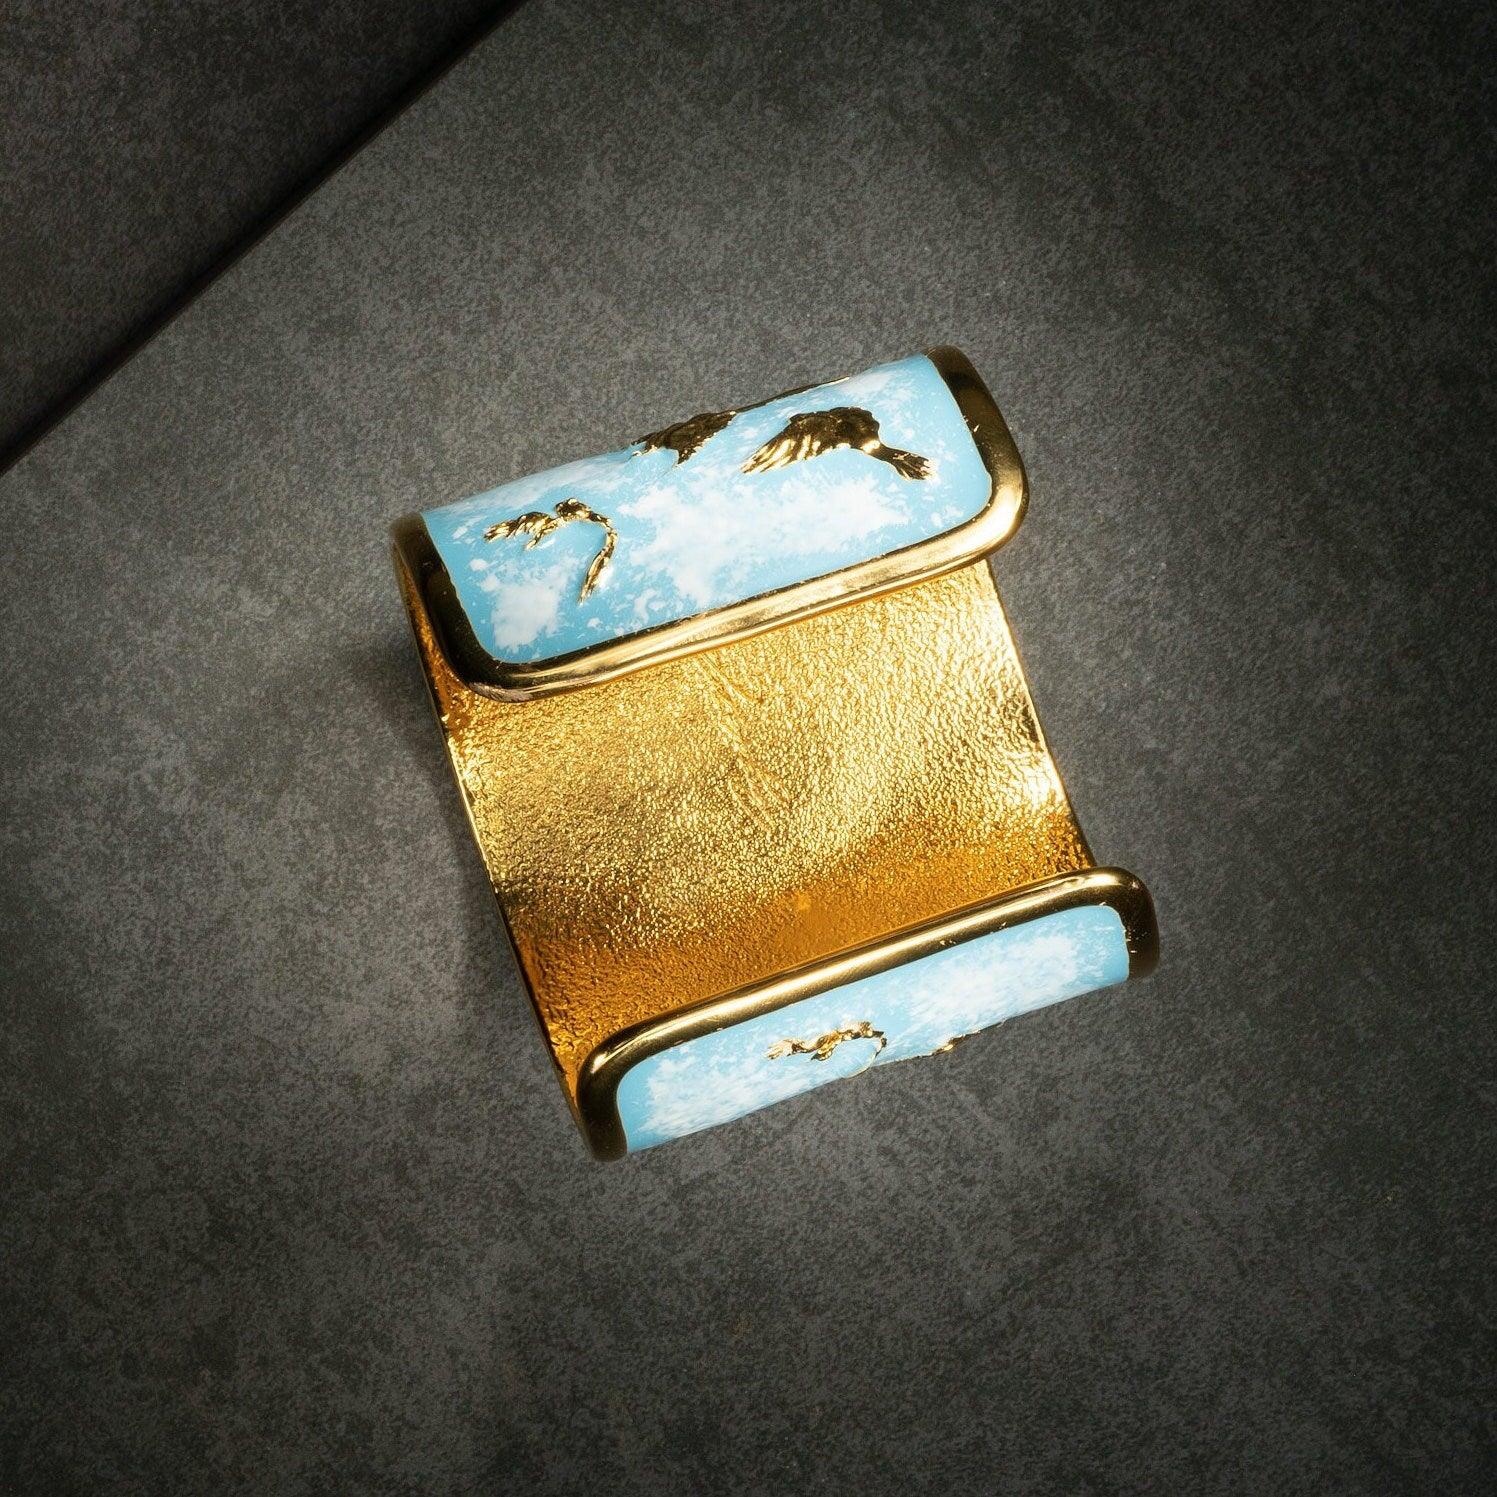 Unique Cuff Bracelet "Arise" - Gold & Sky Blue with Clouds Gift, Gift For Mom, Artistic, Jewelry Cuff, Bracelet, Gold, Silver, Brass